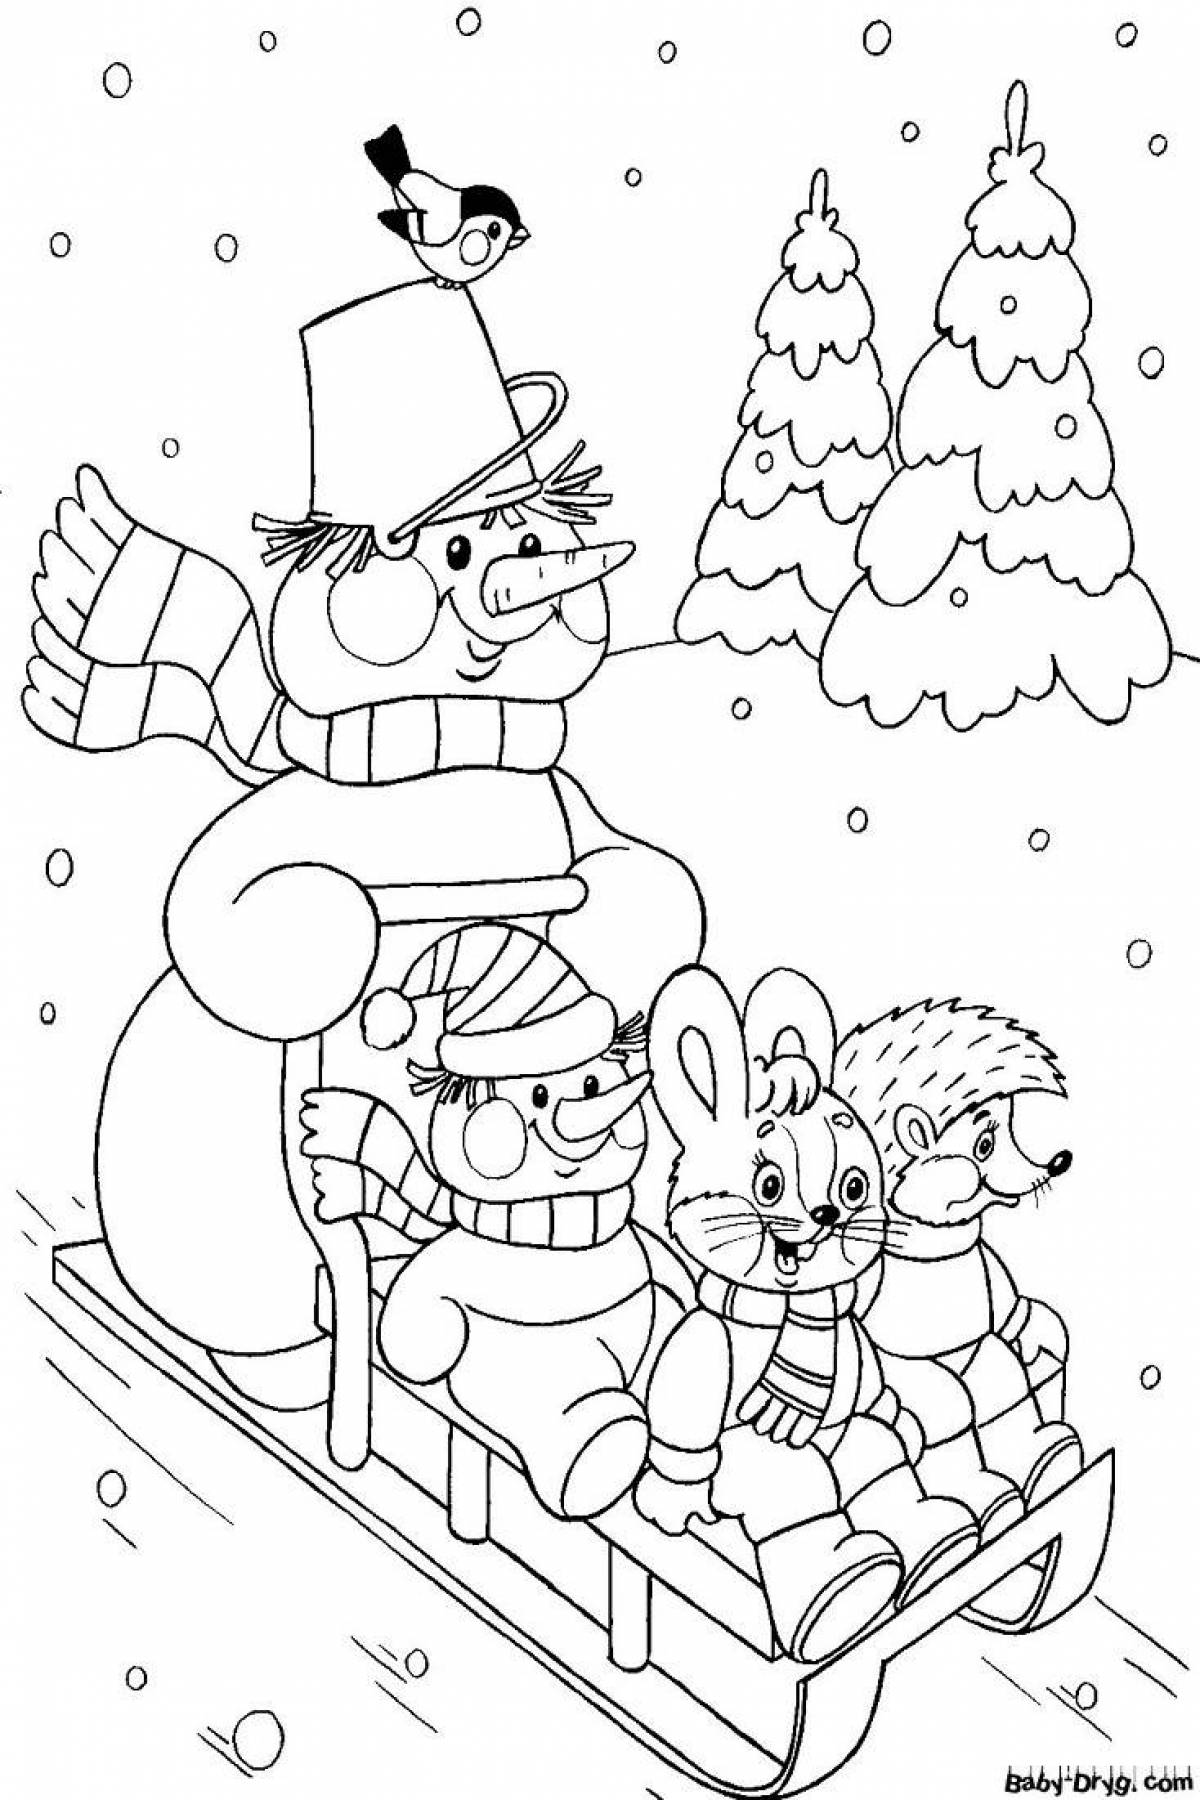 Elegant winter coloring book for children 5-6 years old